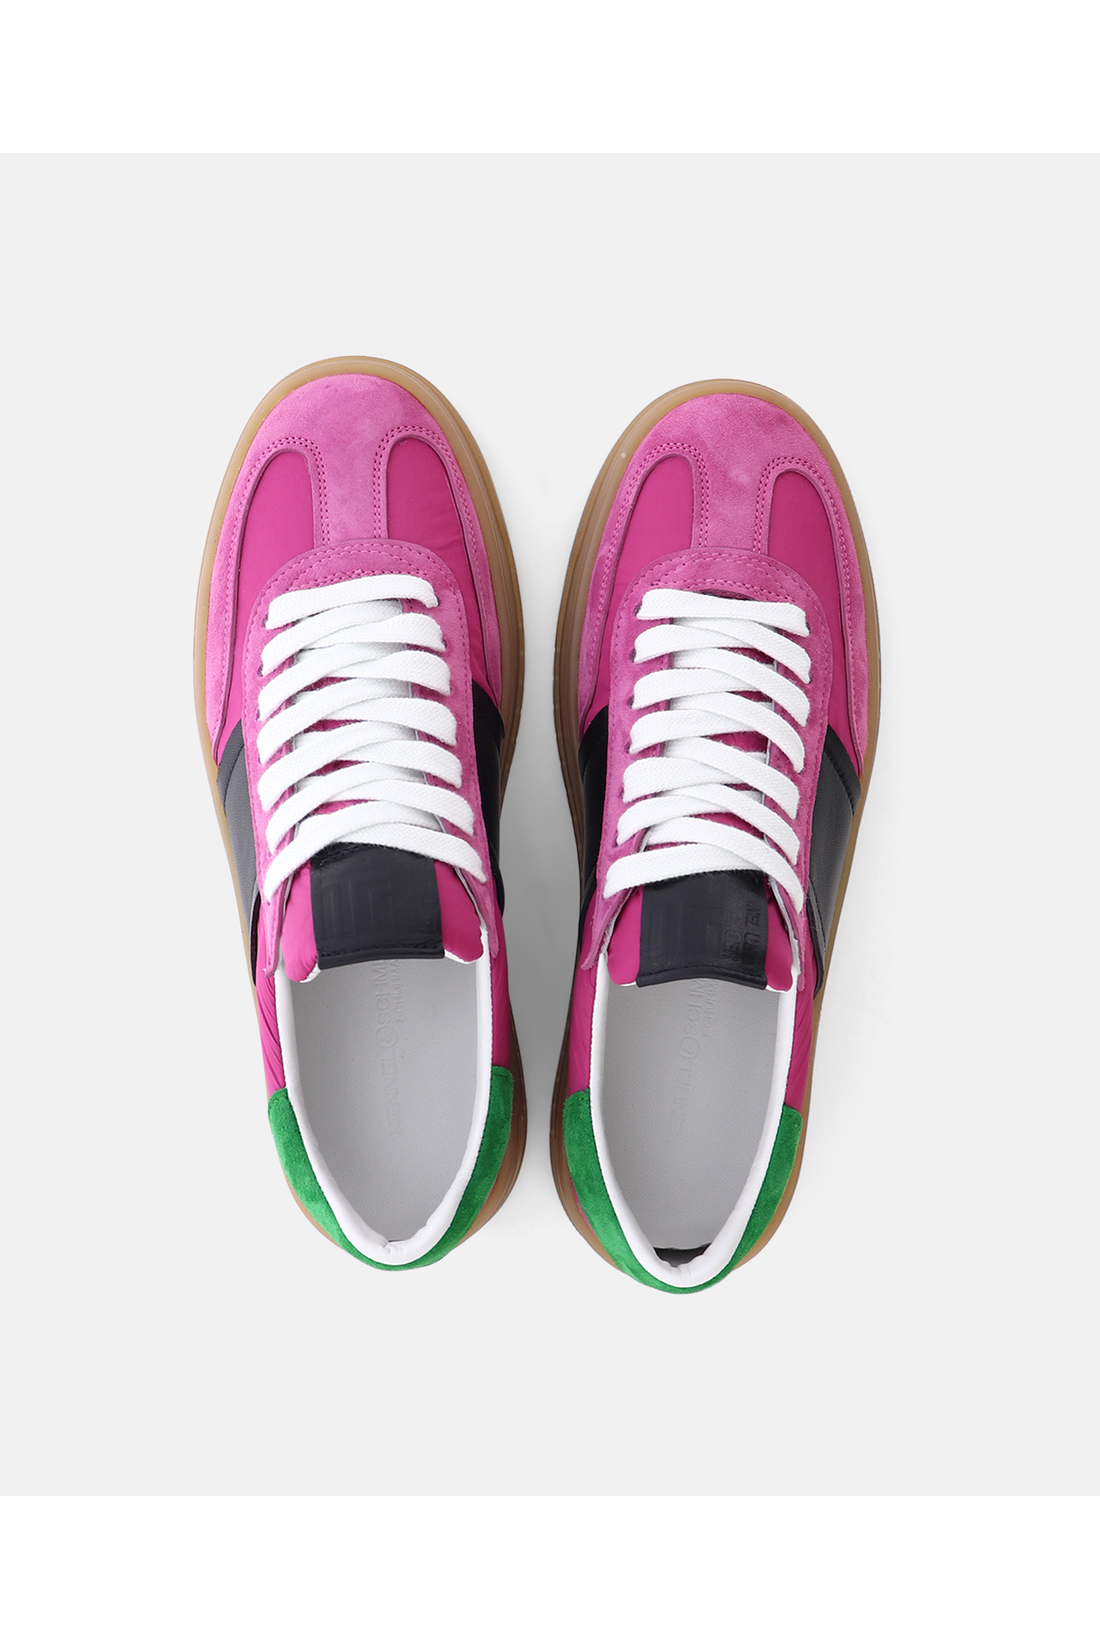 Kennel-Schmenger-OUTLET-SALE-DRIFT-Sneakers-ARCHIVE-COLLECTION-4_b0728275-6e02-4d0a-ab36-0f319c9f4247.png